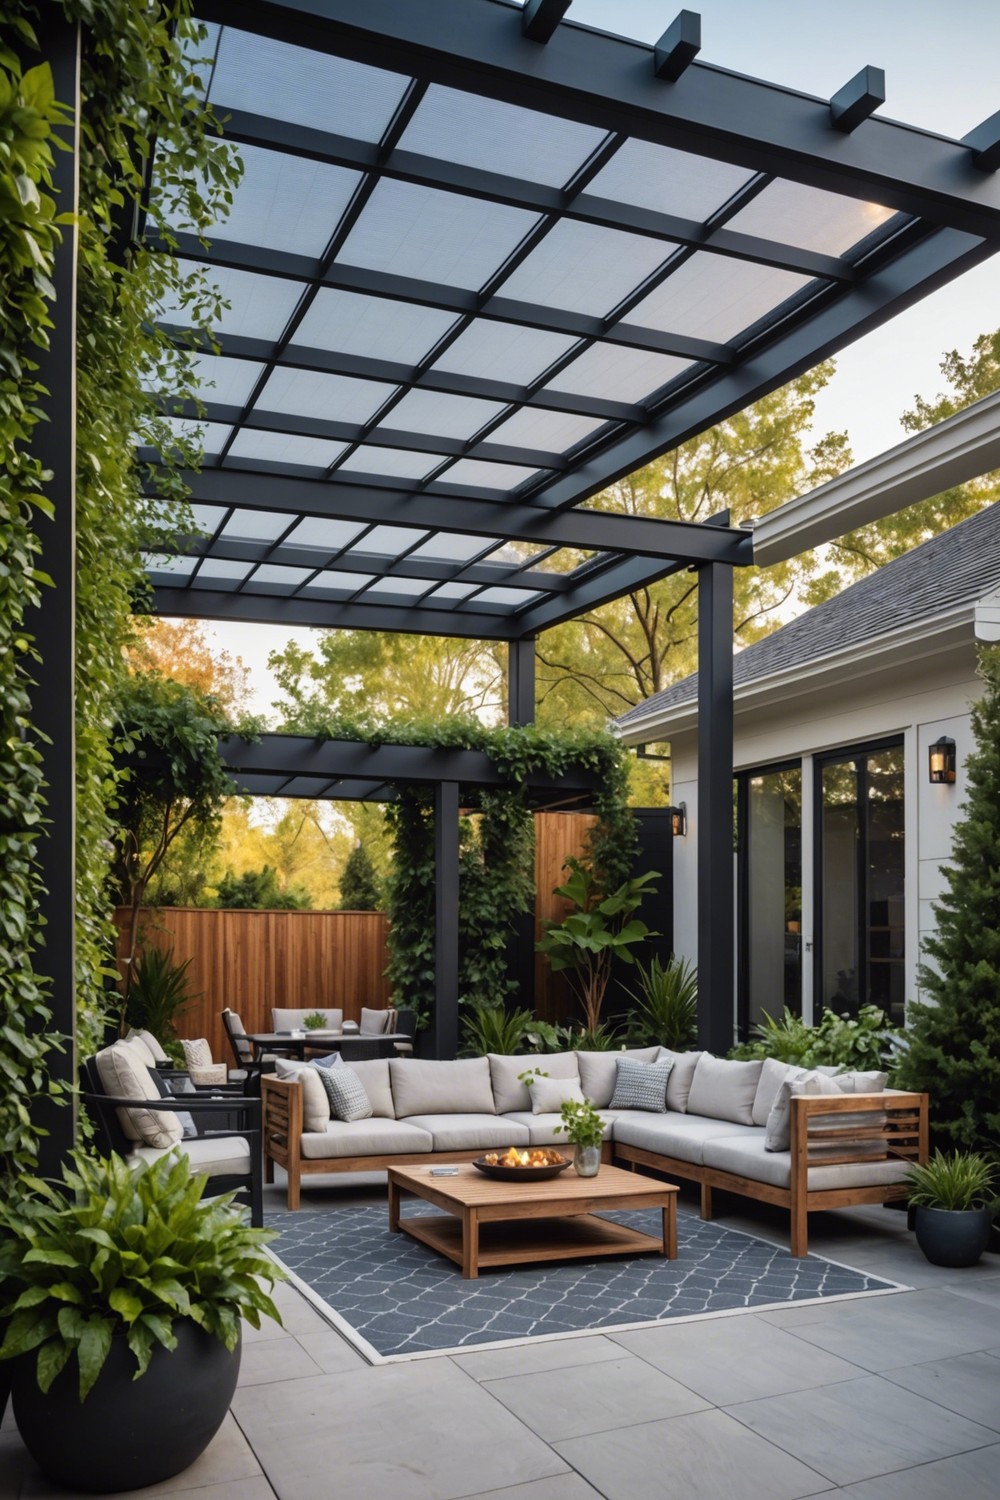 Pergola with Solar Screens for Energy Efficiency